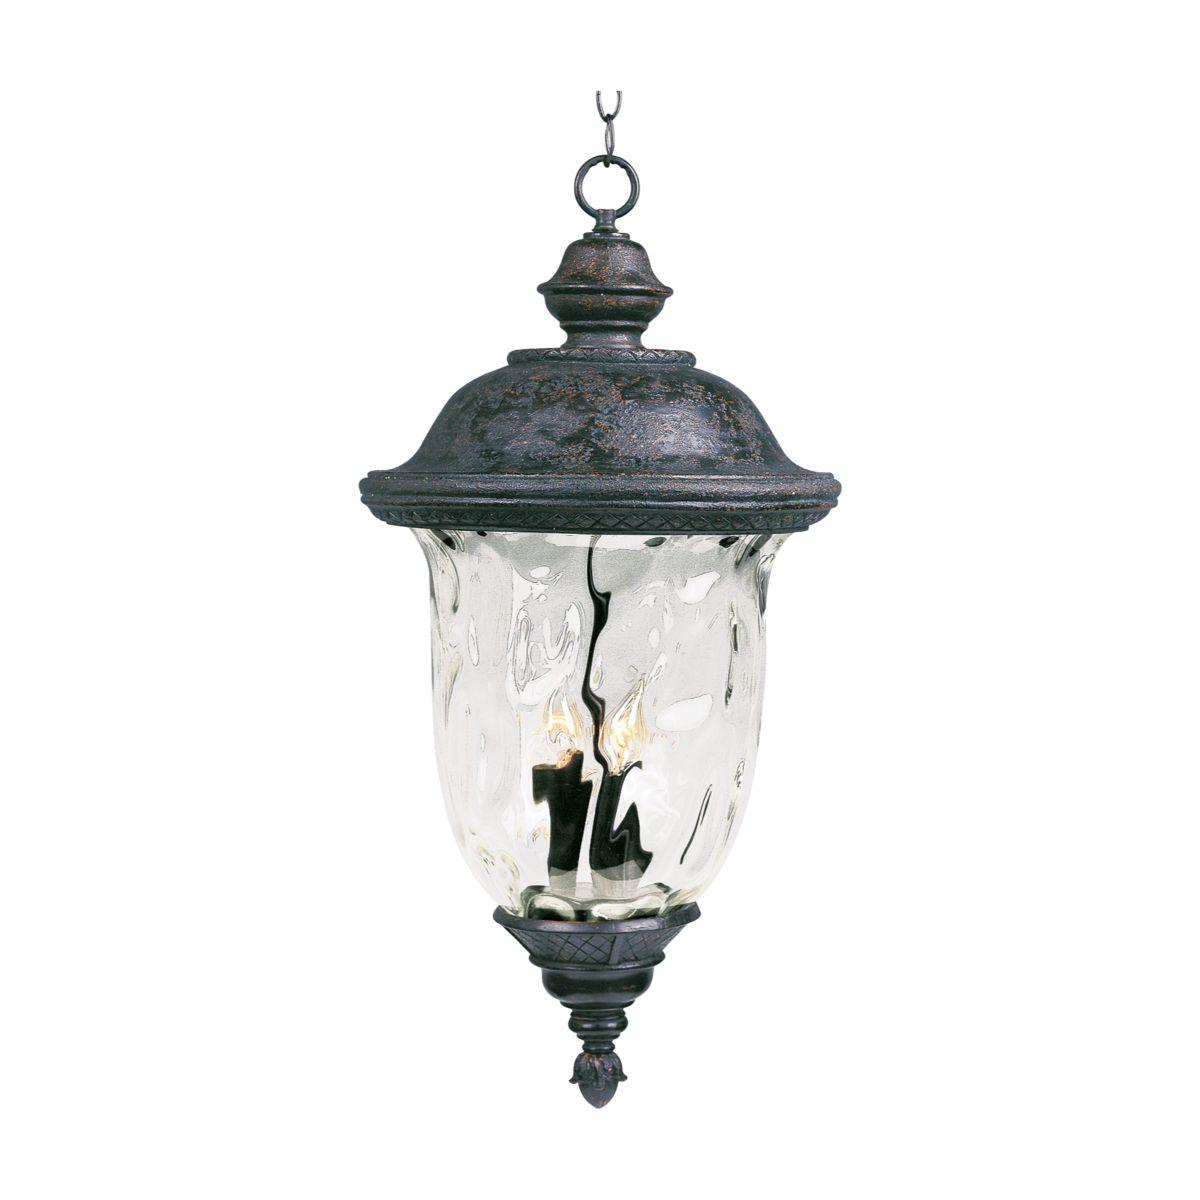 Carriage House DC 28 in. 3 Lights Outdoor Hanging Lantern Bronze Finish